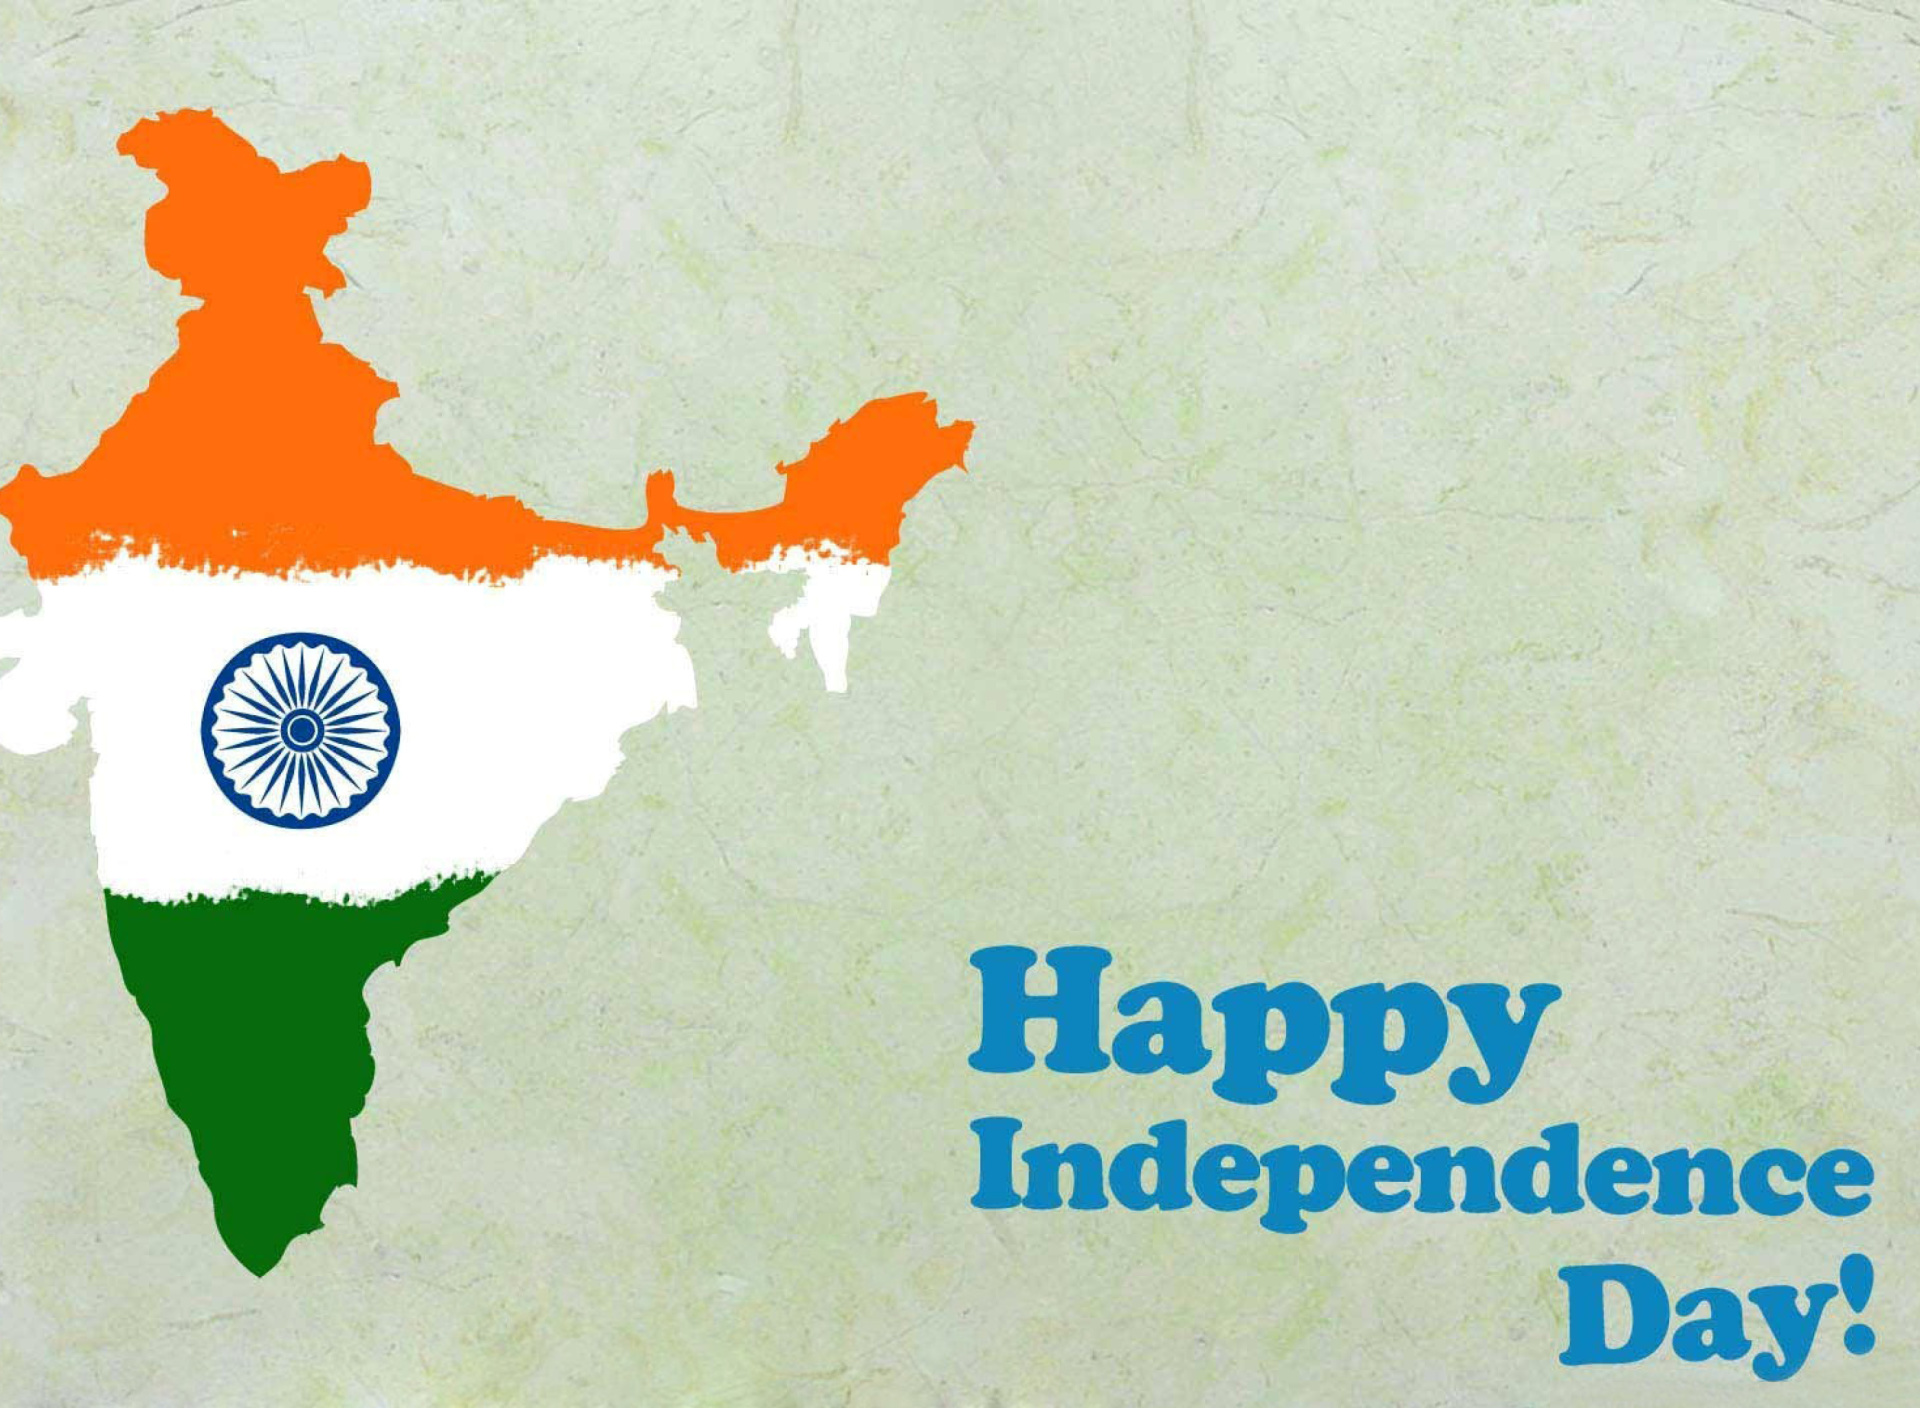 Happy Independence Day India screenshot #1 1920x1408